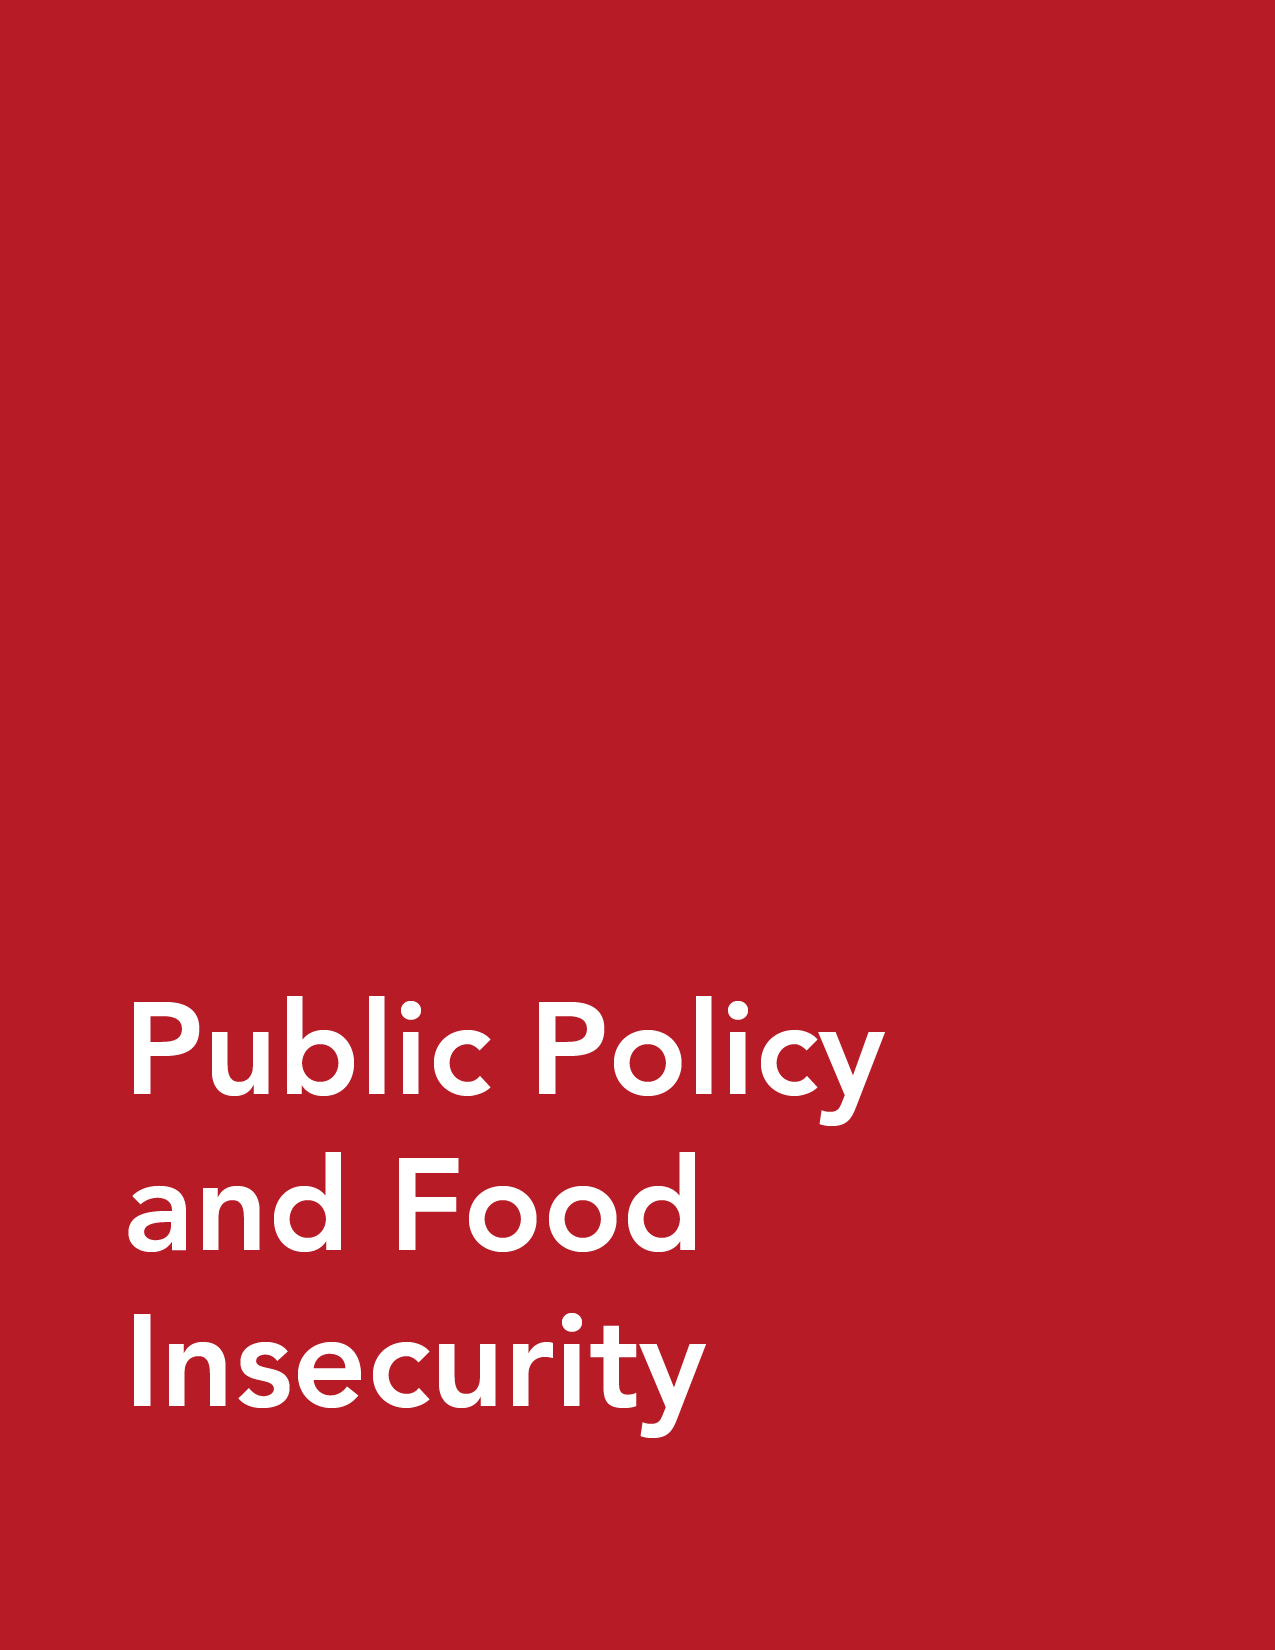 Fact Sheet: Public Policy and Food Insecurity